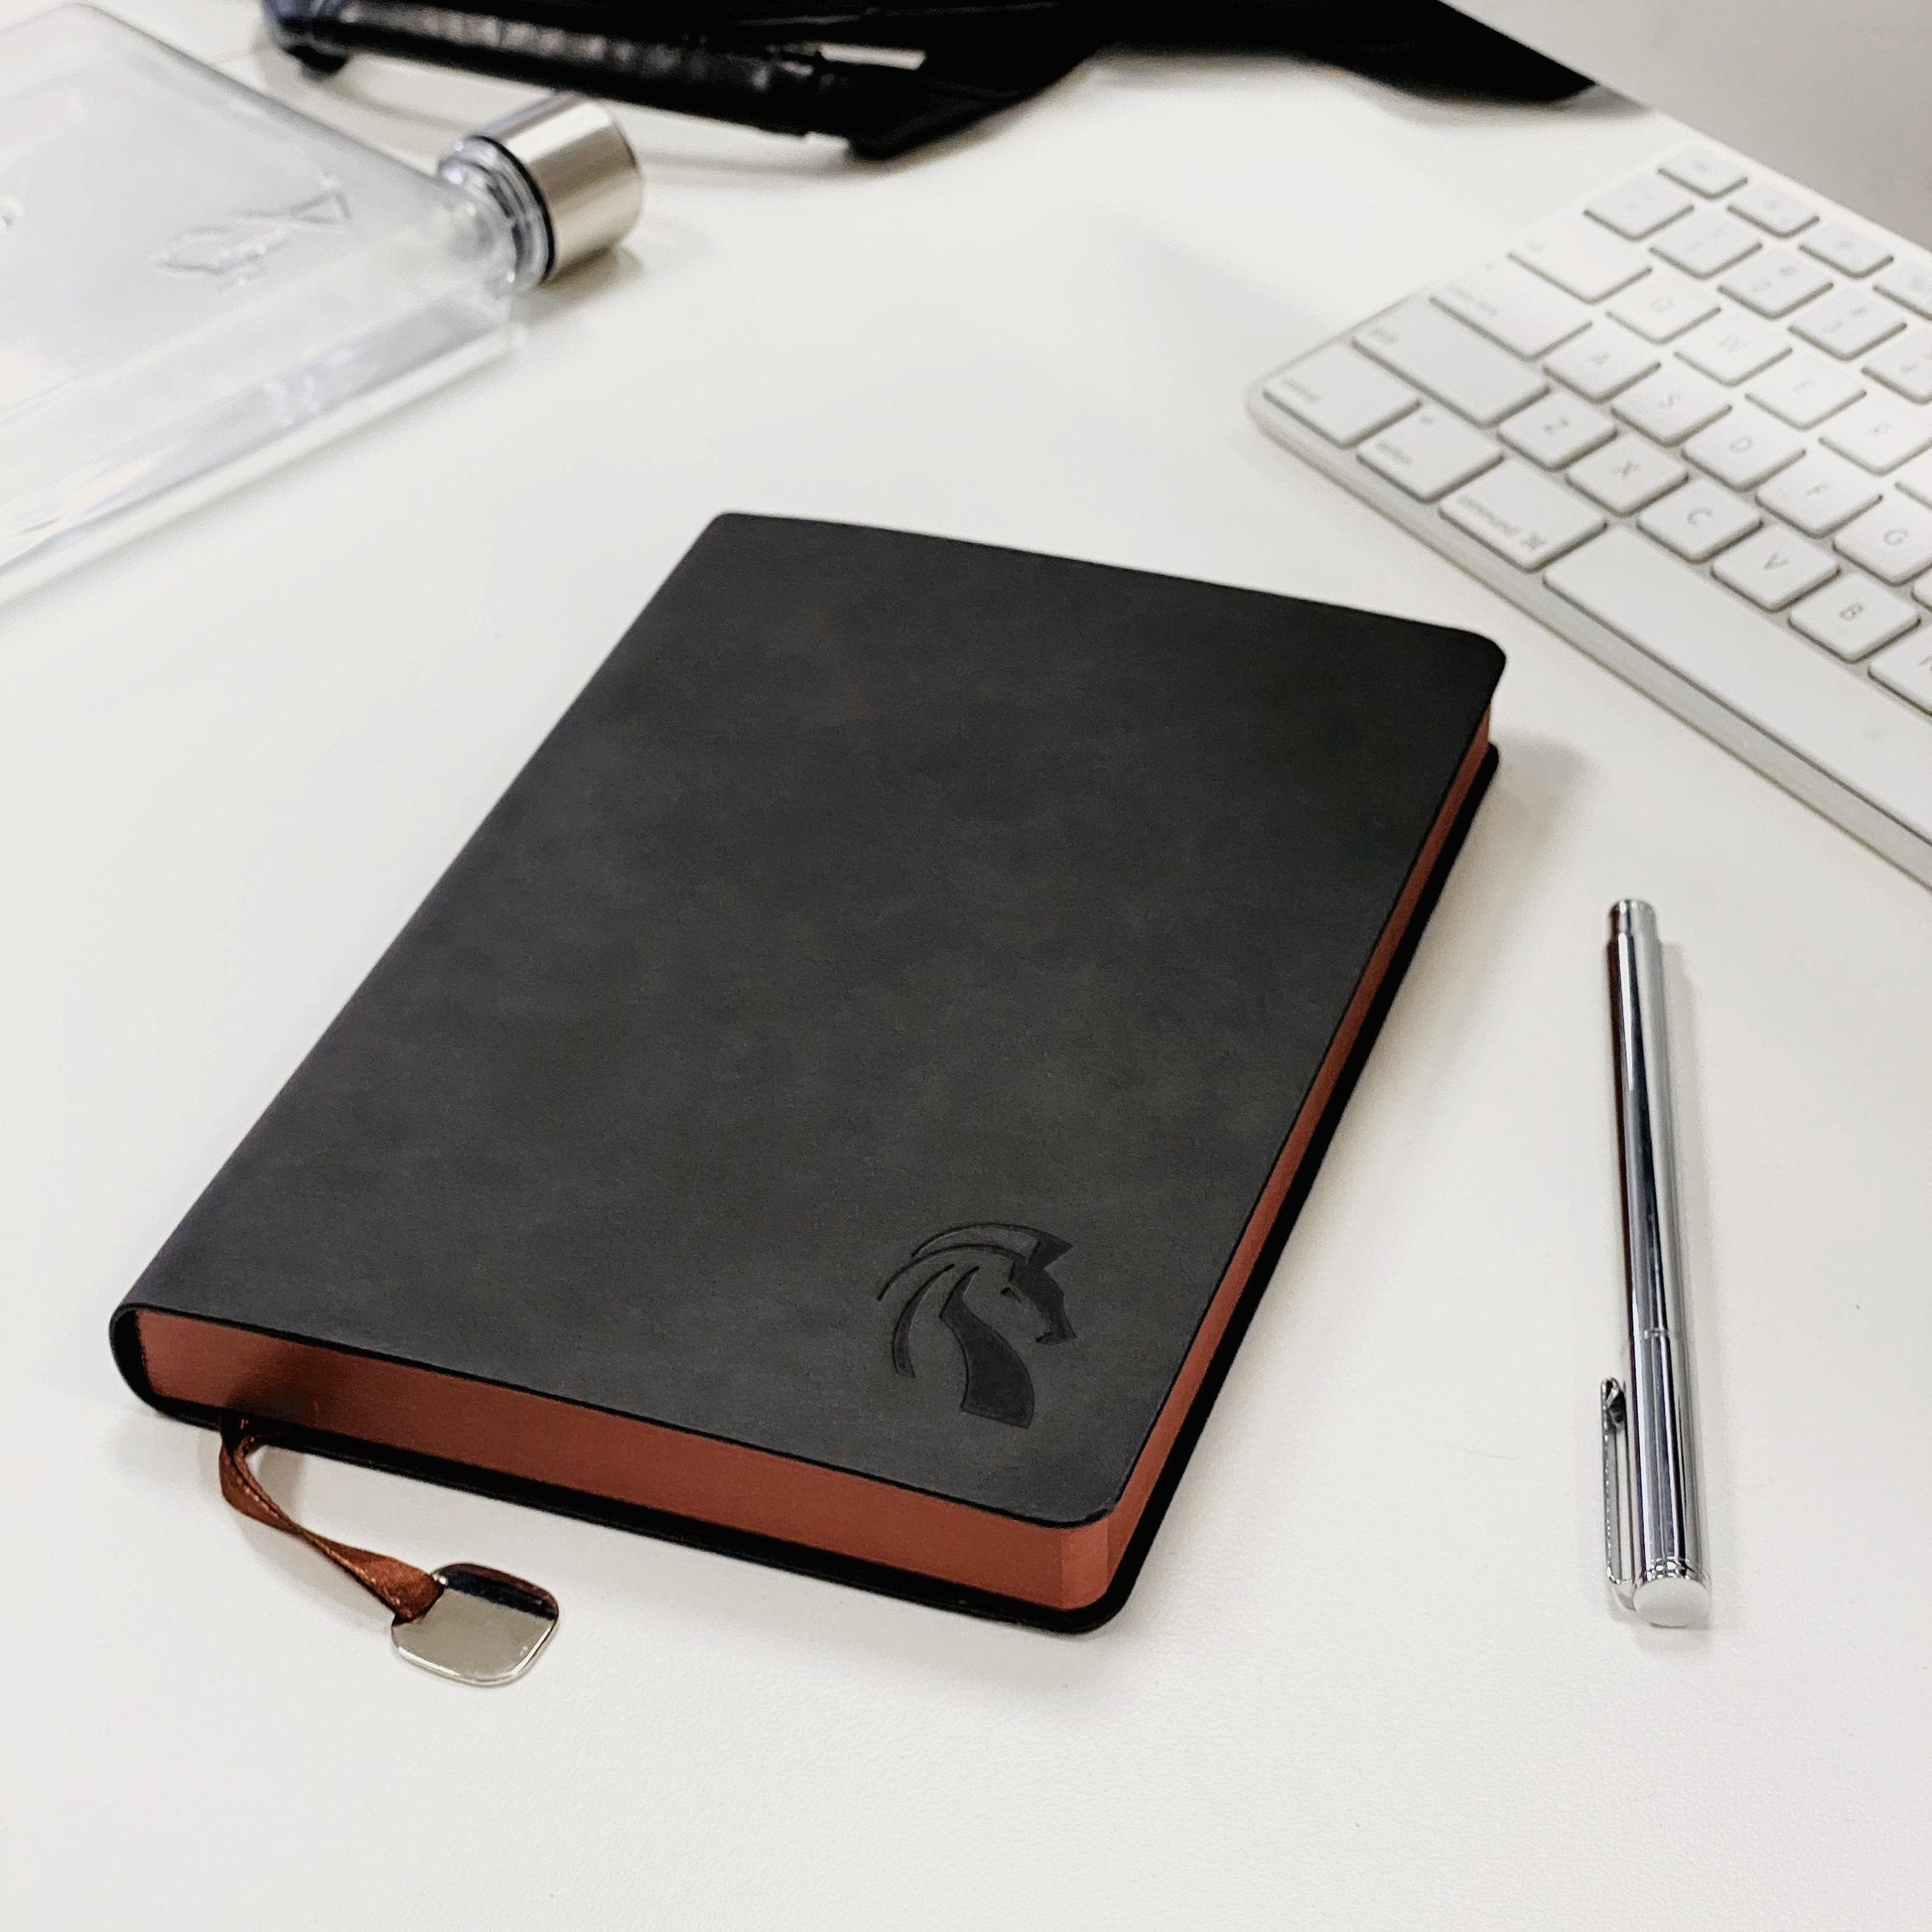 What kind of notebook do you use with a fountain pen? – LeStallion